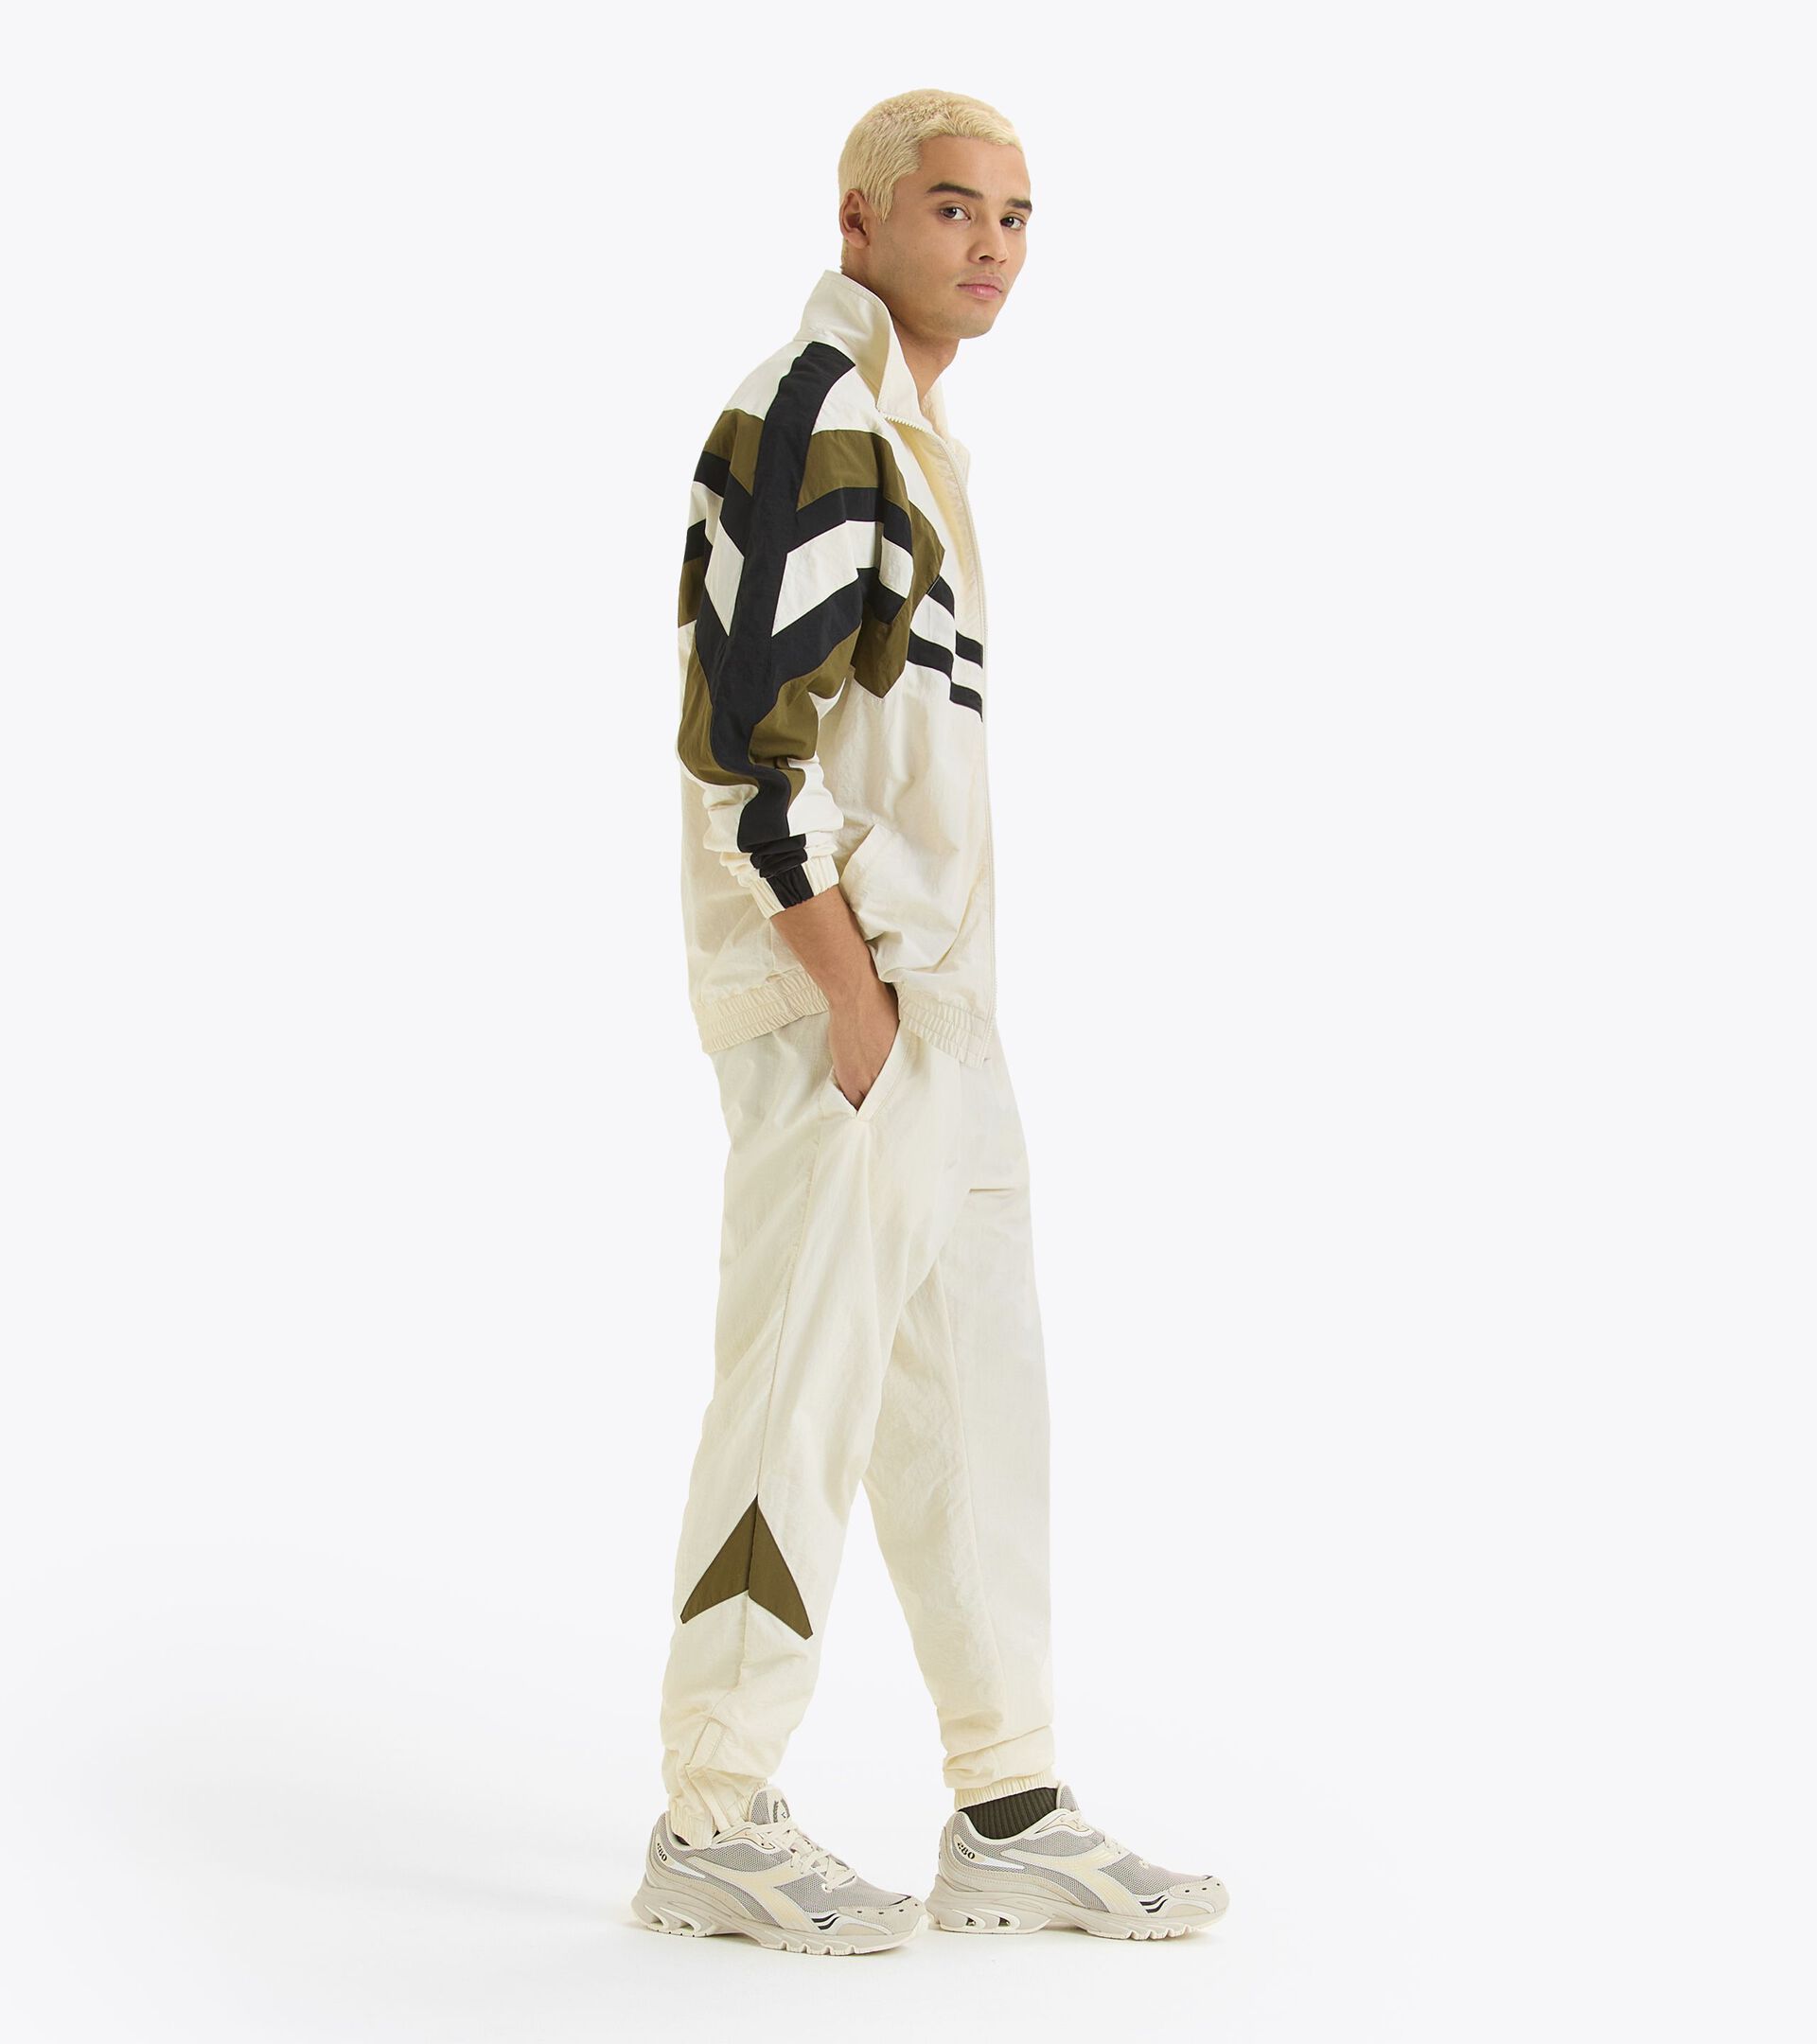 Sporthose - made in Italy - genderneutral TRACK PANTS LEGACY WISPERN WEISS - Diadora